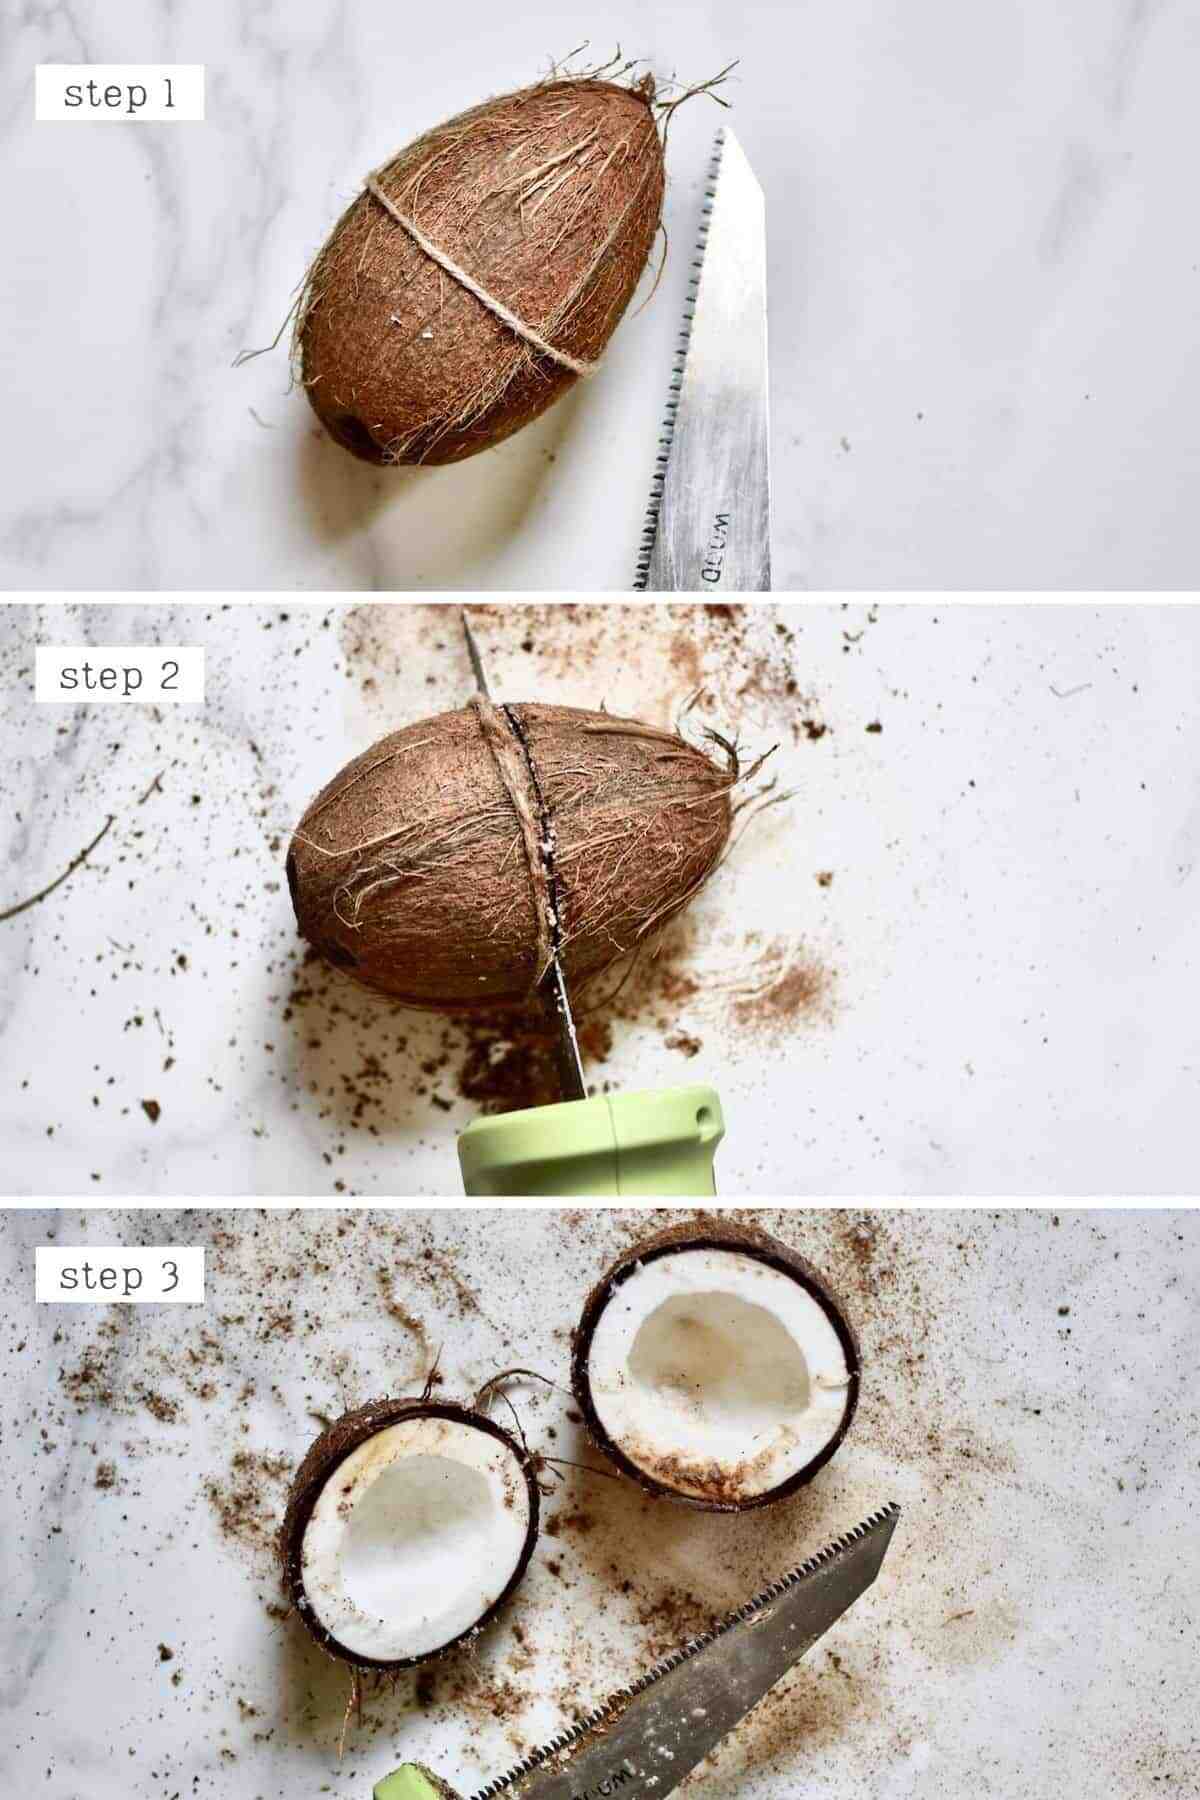 How do you open a coconut shell at home?